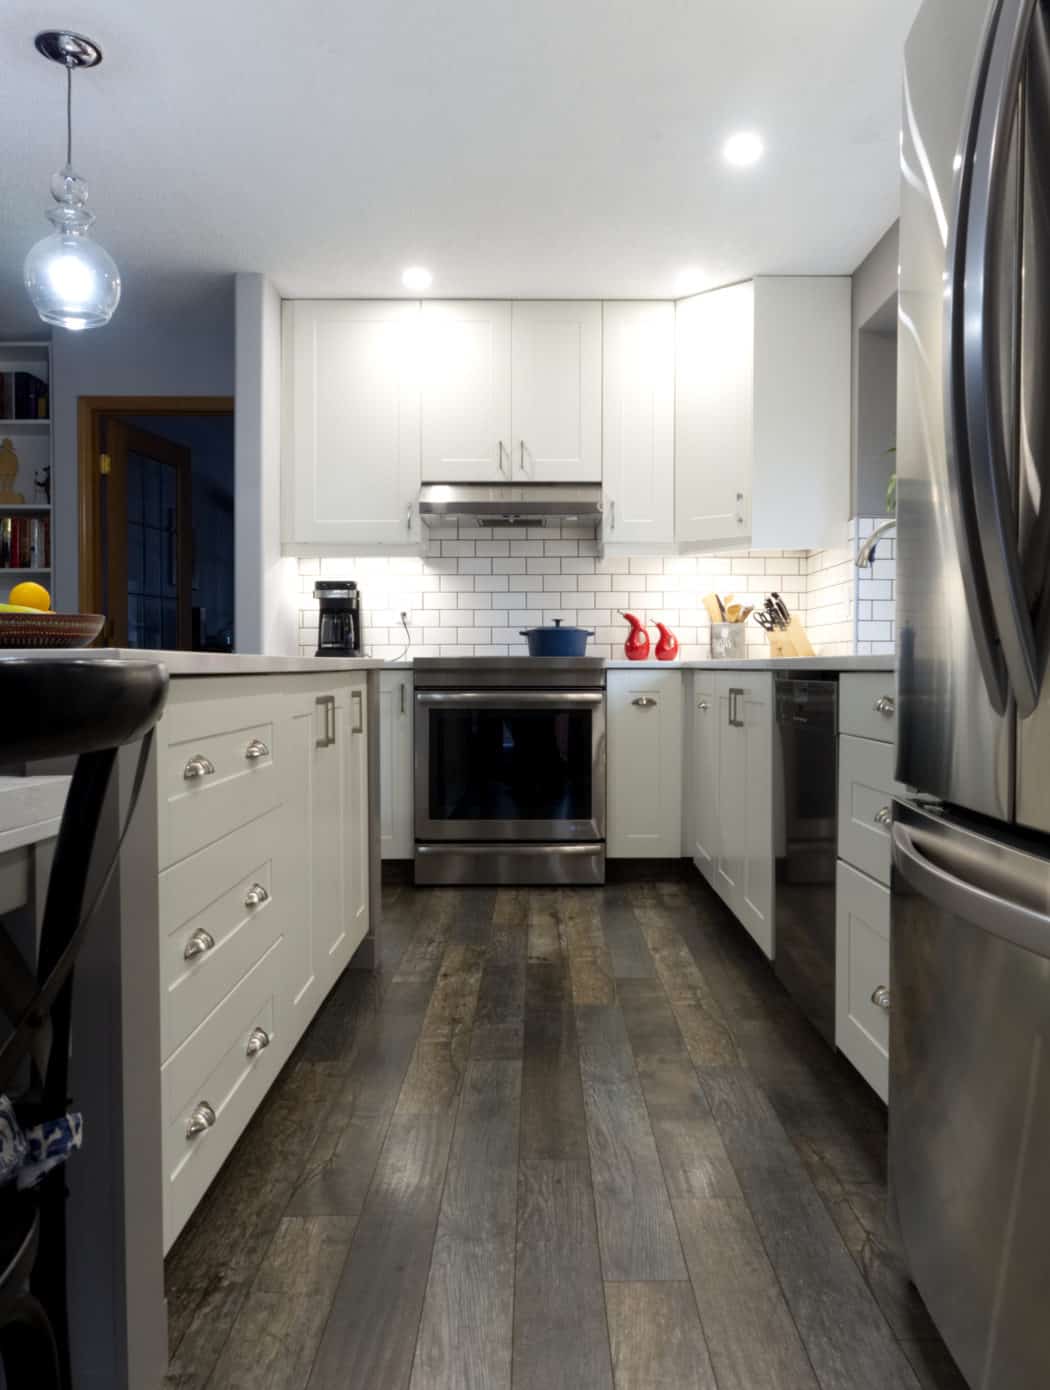 Ikea Kitchen Review Pros Cons And, What Are High Quality Kitchen Cabinets Made Of Ikea